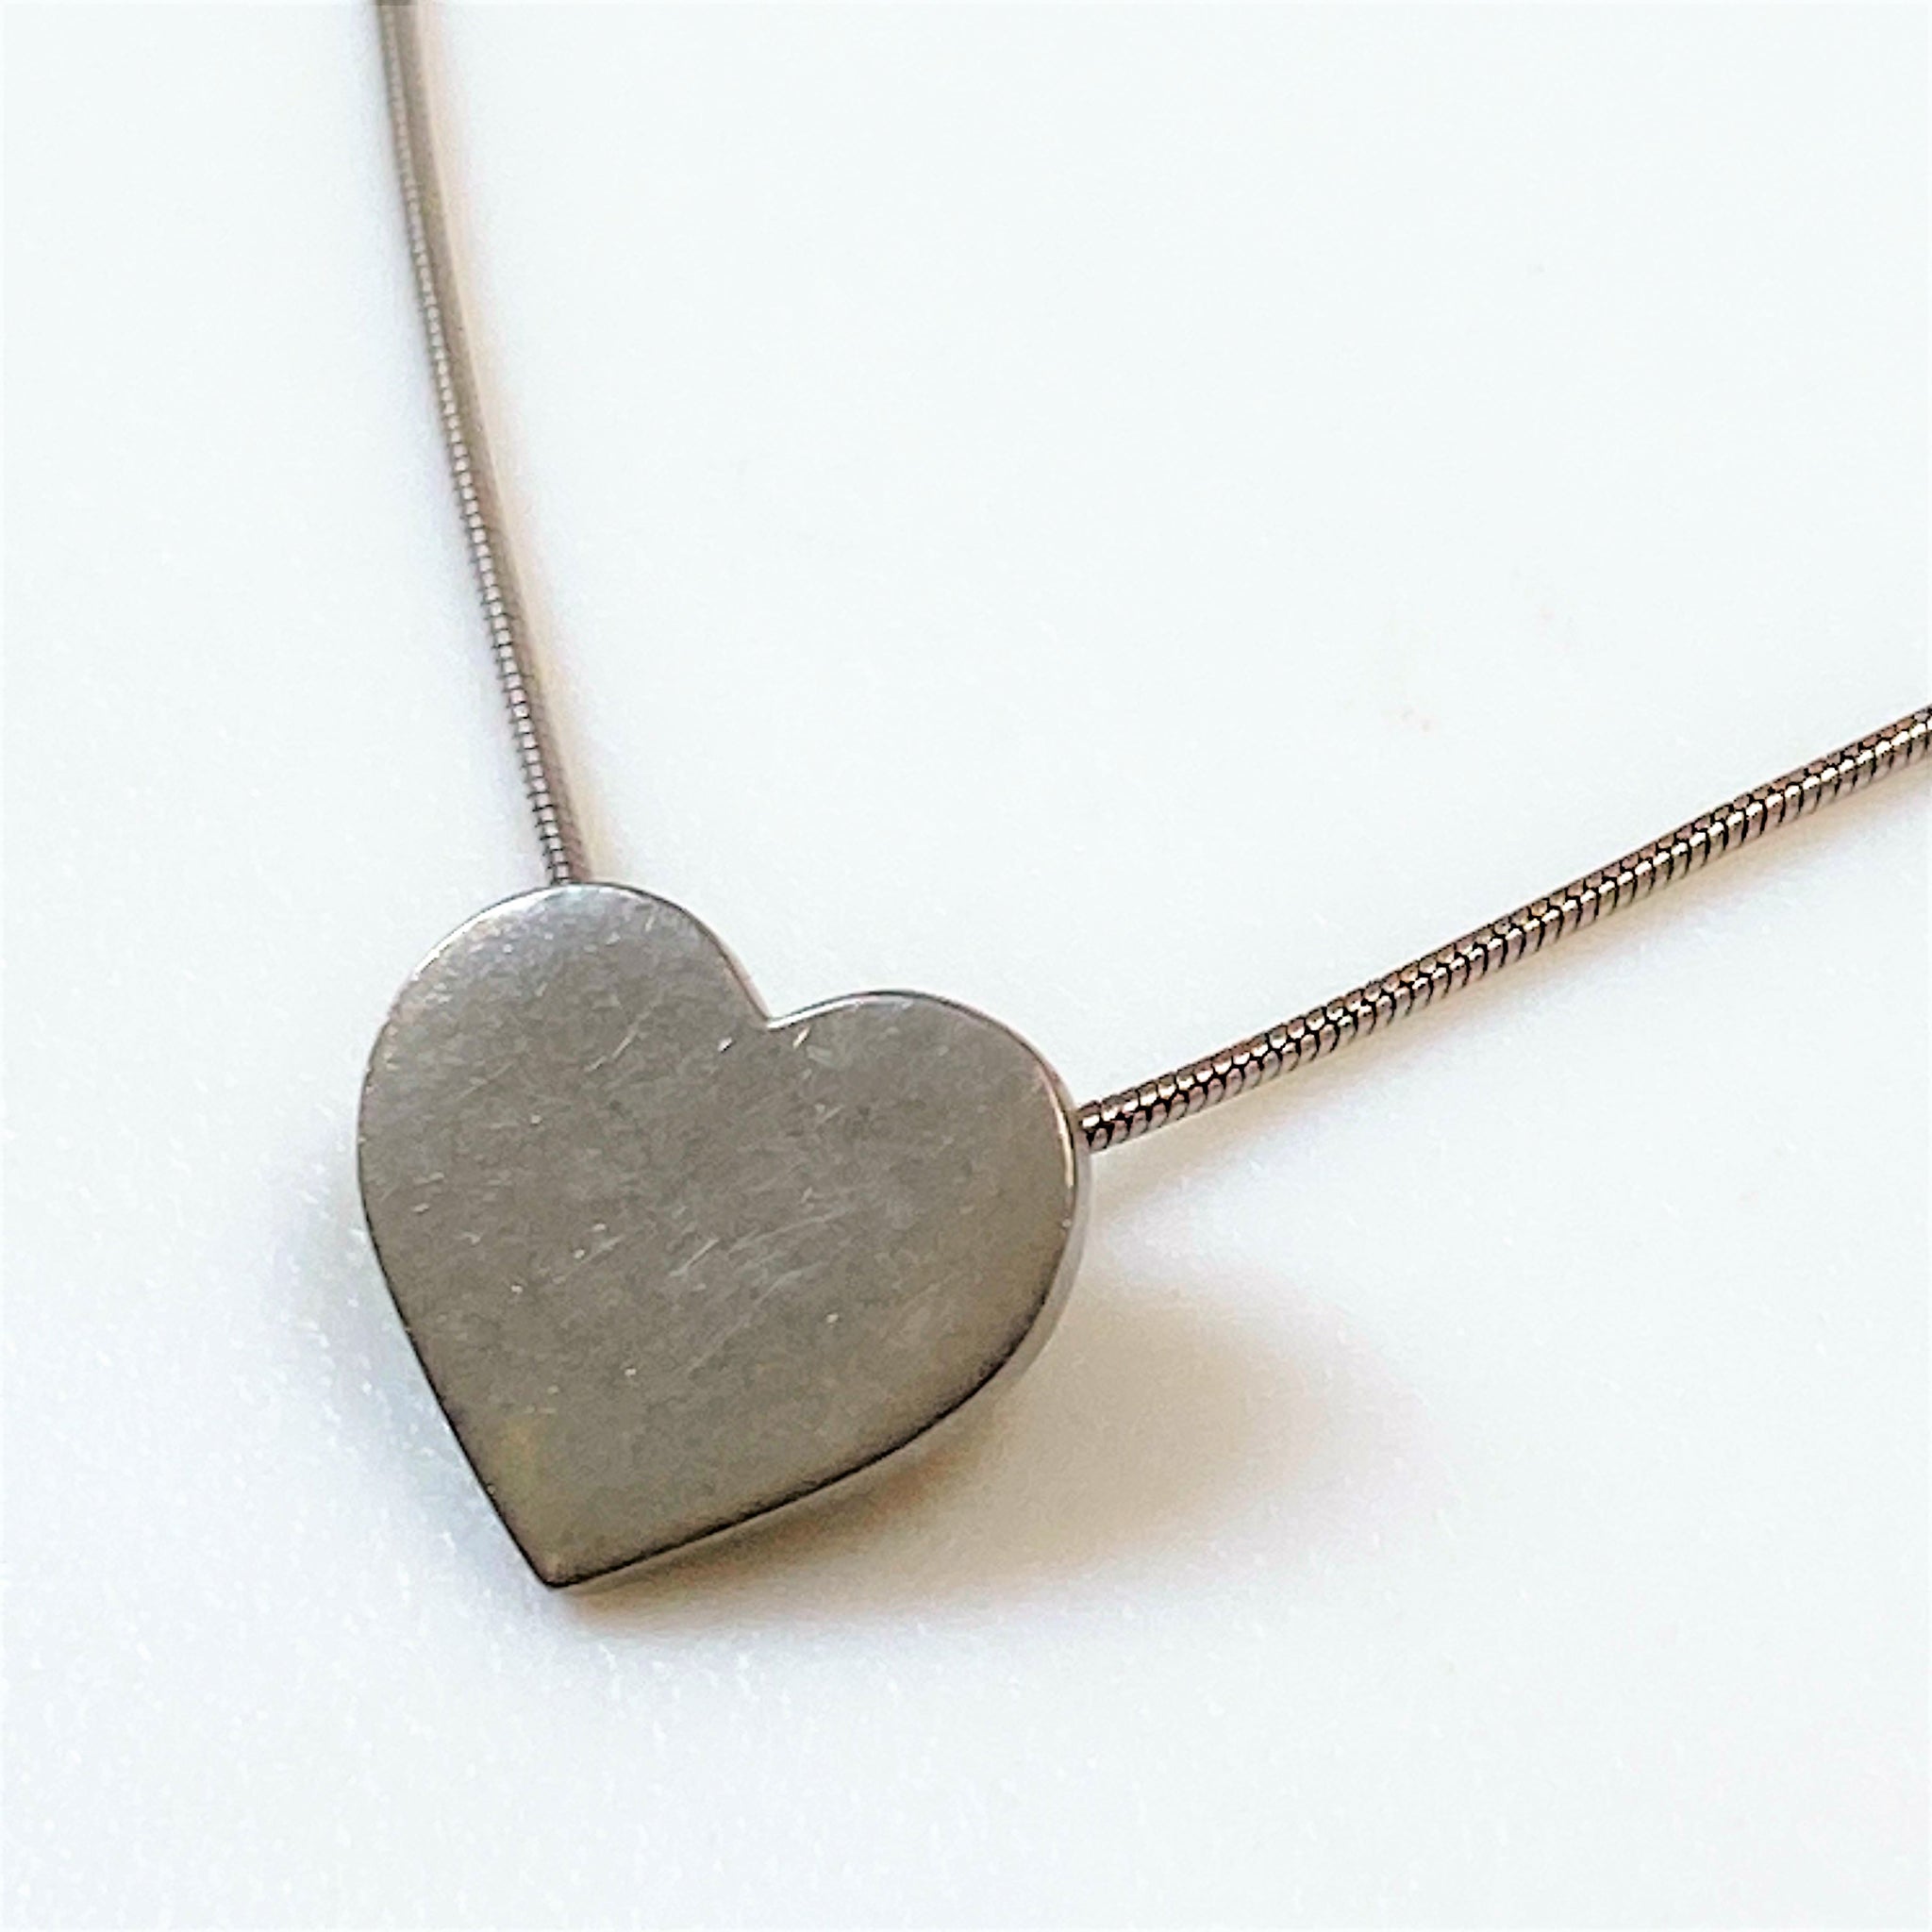 Sterling Silver “Heart” Pendant and Chain Necklace